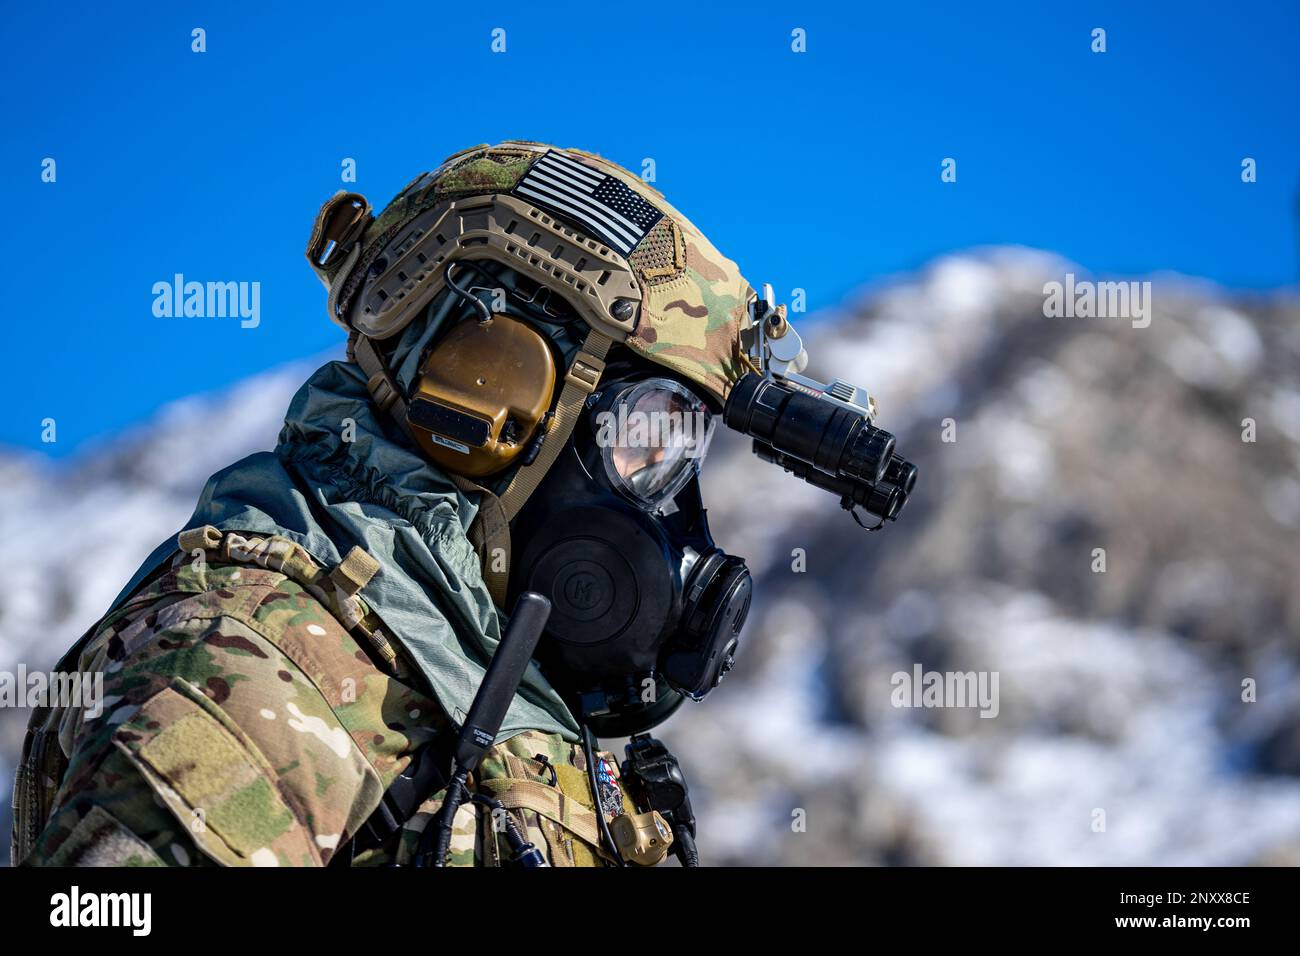 A Soldier assigned to the 56th Chemical Reconnaissance Detachment (CRD), 4th Battalion, 5th Special Forces Group (Airborne), prepares to conduct sensitive site exploitation training as part of a 1st Special Forces Command external evaluation exercise in Dugway, Utah, Jan. 31, 2023. The exercise, providing realistic mission training, evaluates CRD’s technical and tactical skillsets to deploy to combat environments. Stock Photo